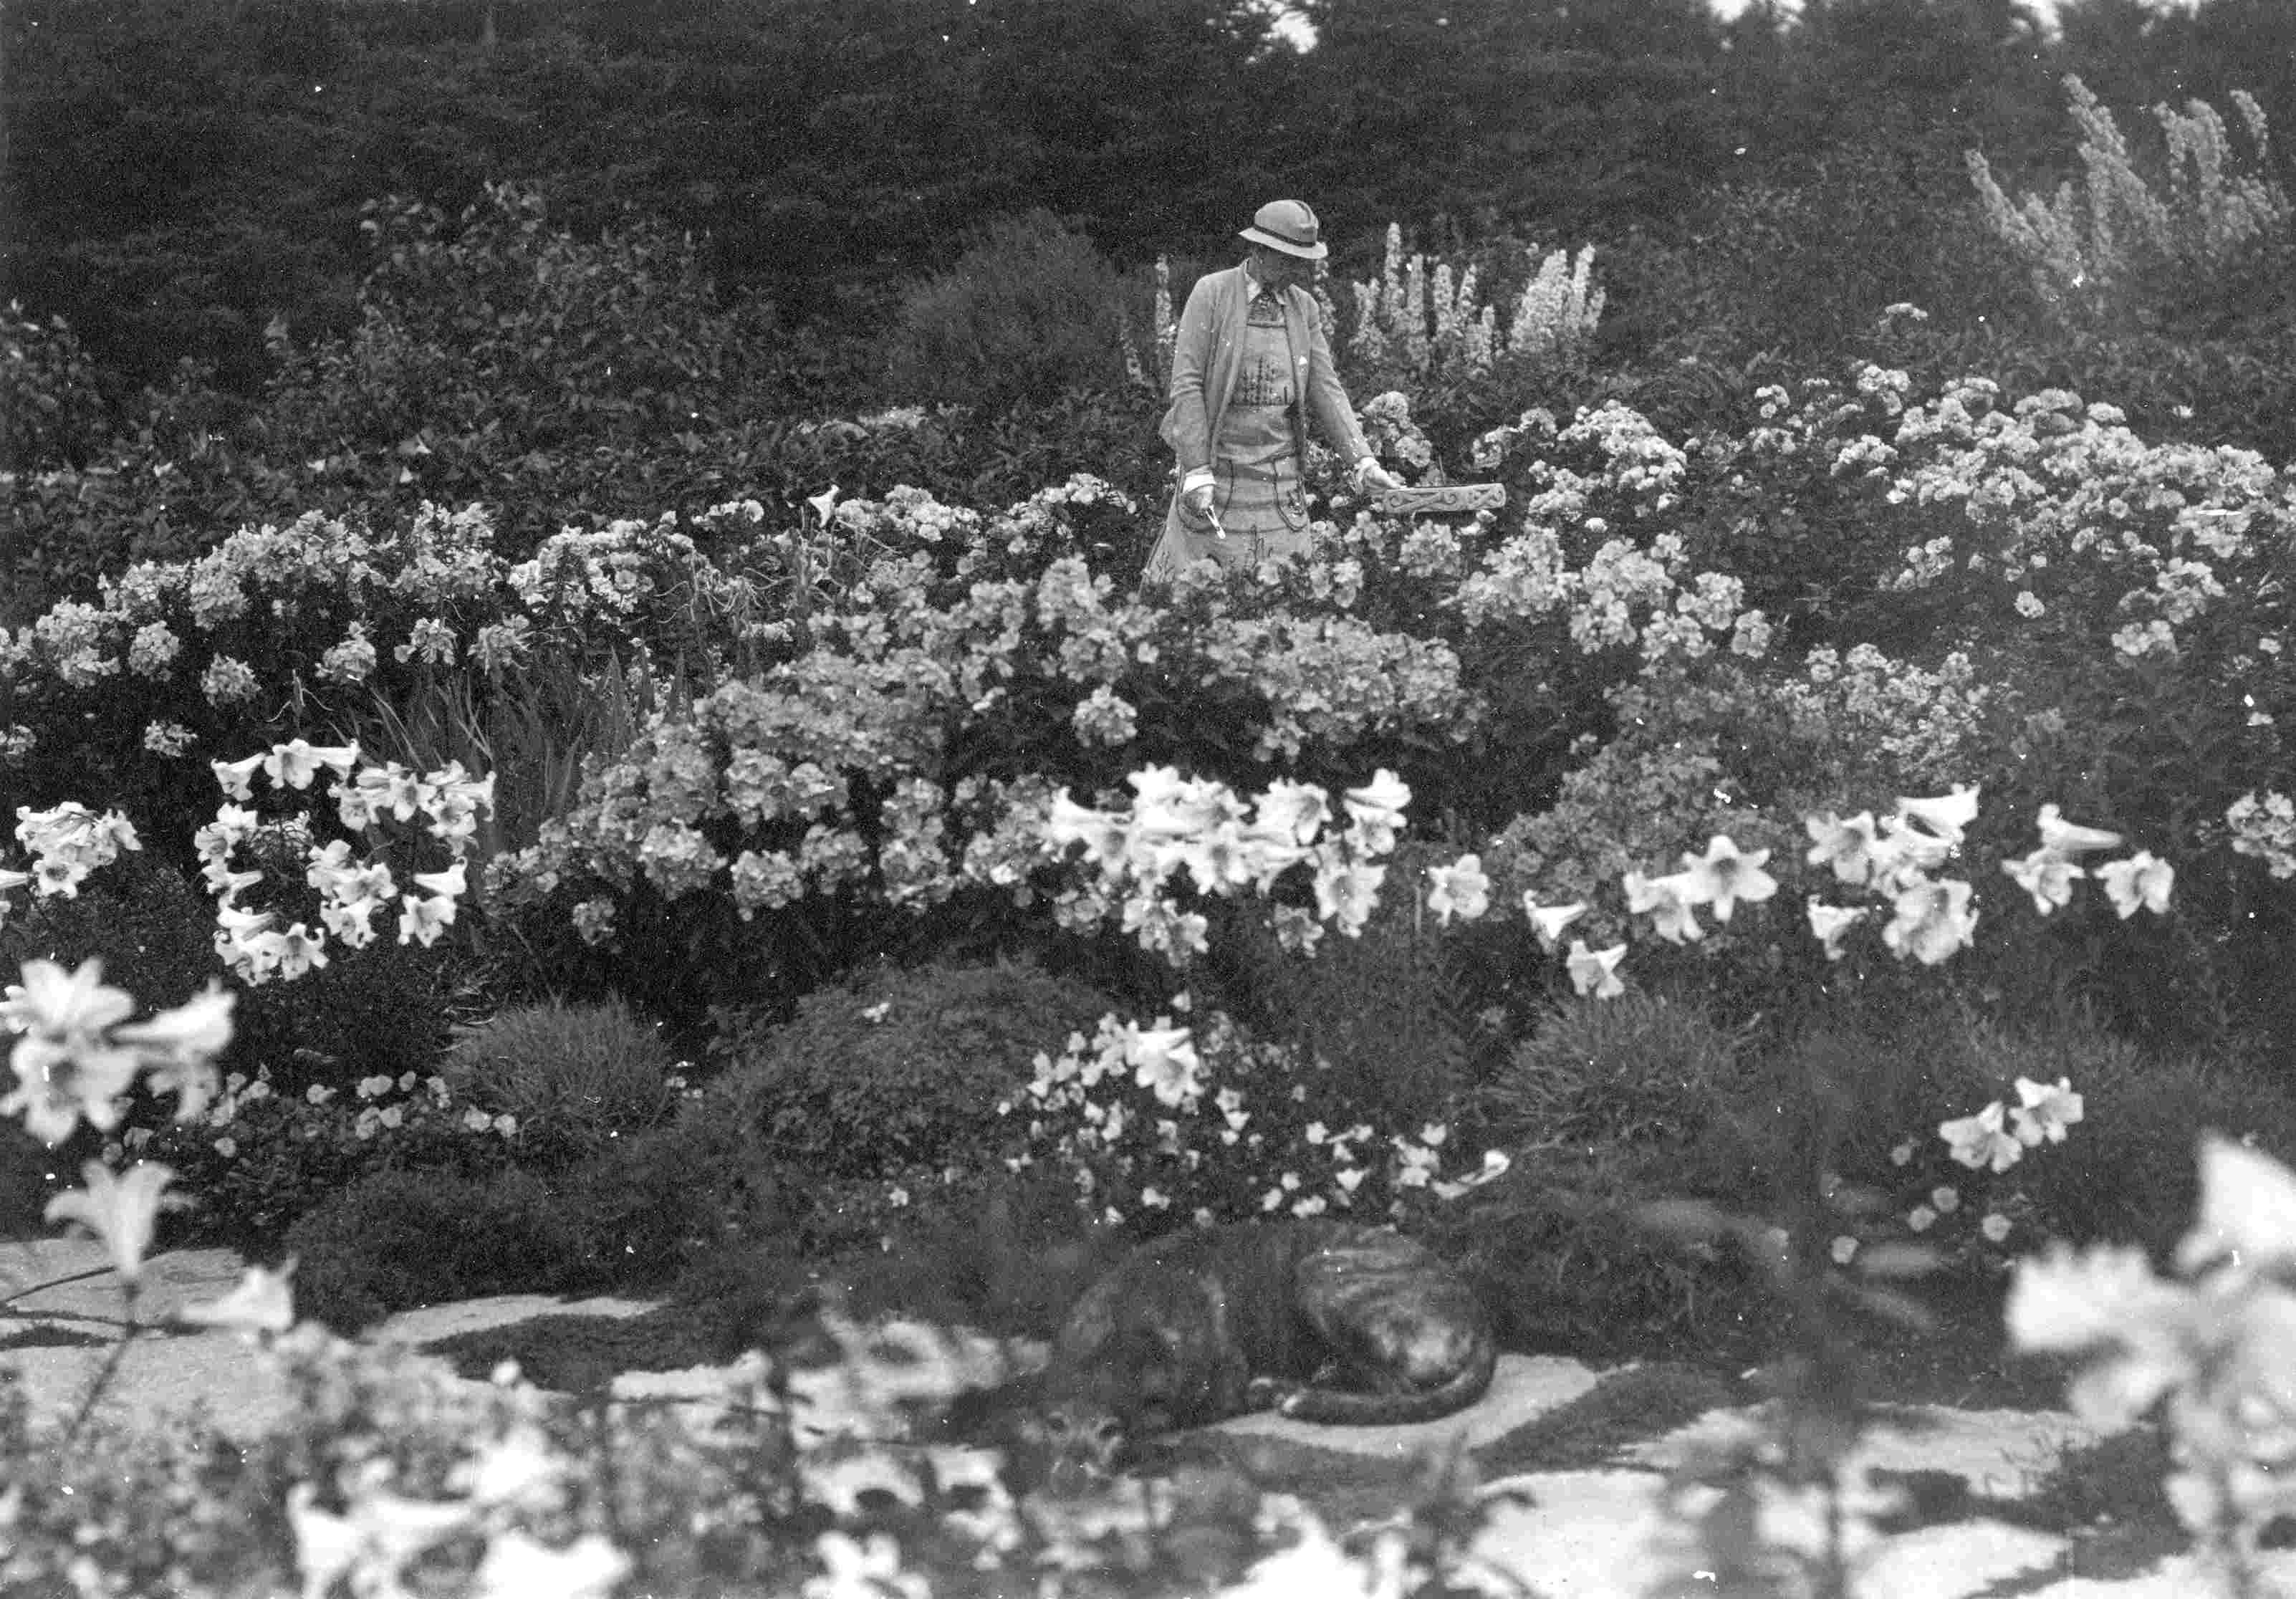 A woman trimming plants in a flower garden with a dog sleeping on a flagstone in the foreground.